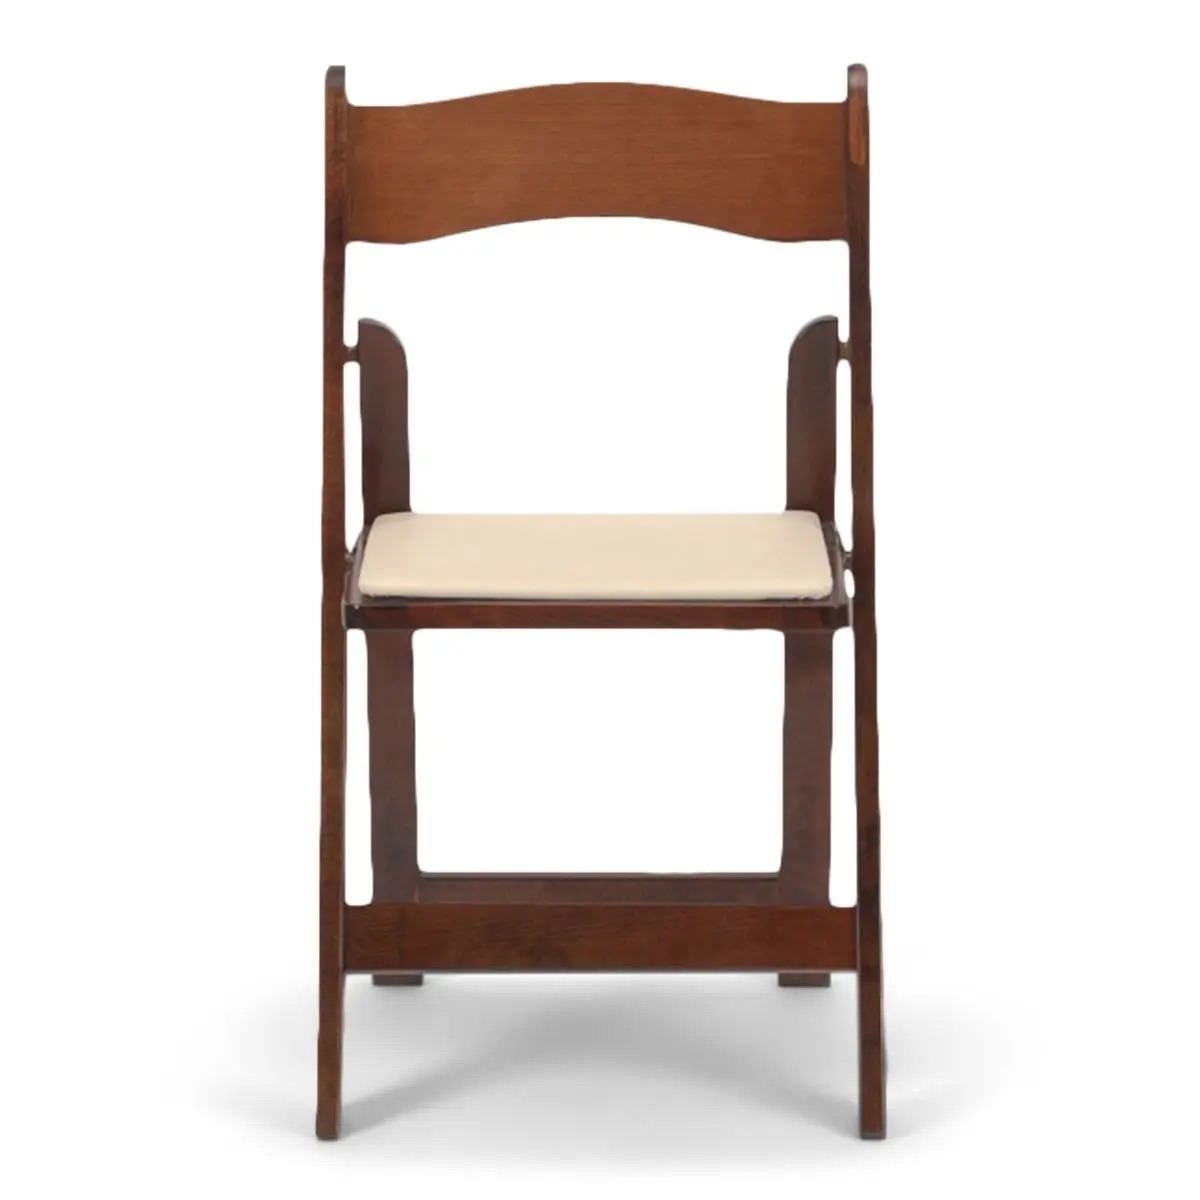 brown-folding-fruitwood-chairs-with-padding-hughes-event-rentals-charleston-sc2.jpeg